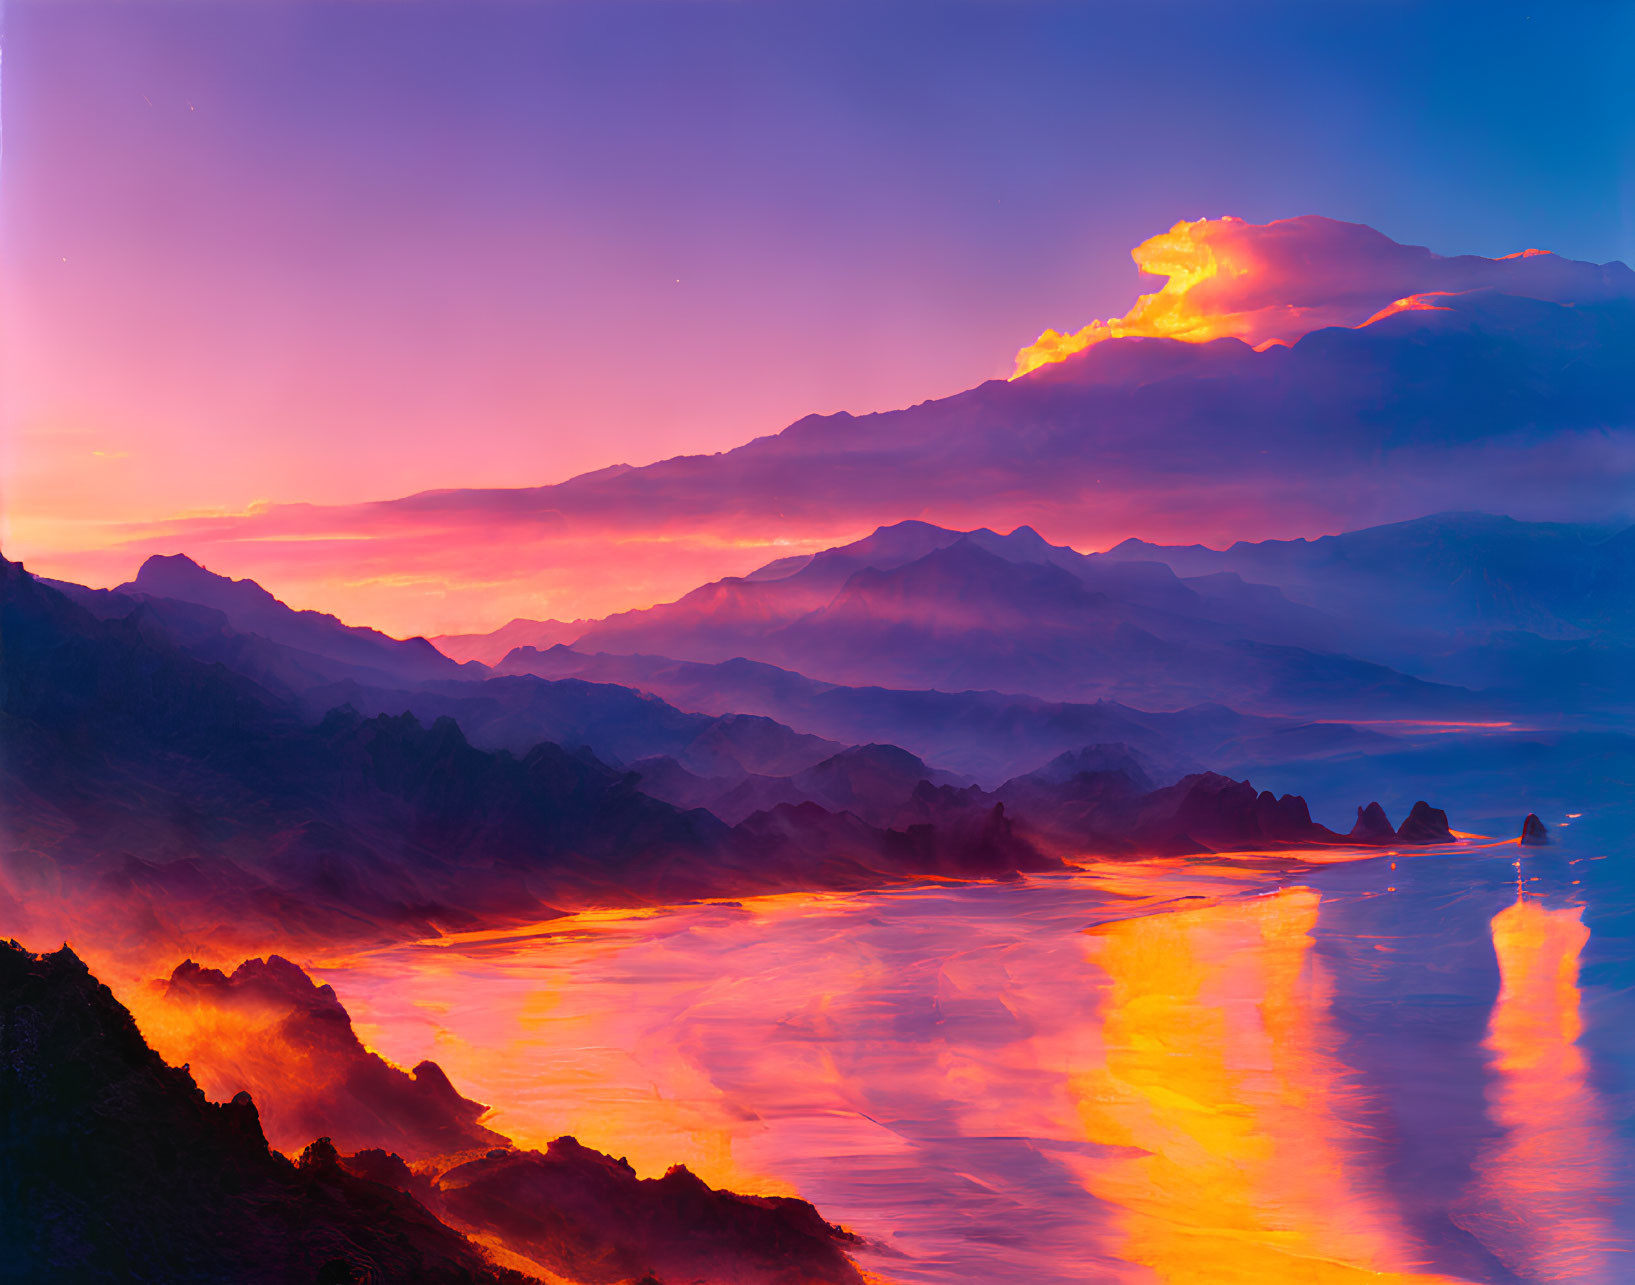 Scenic sunset over river with fiery clouds and mountains